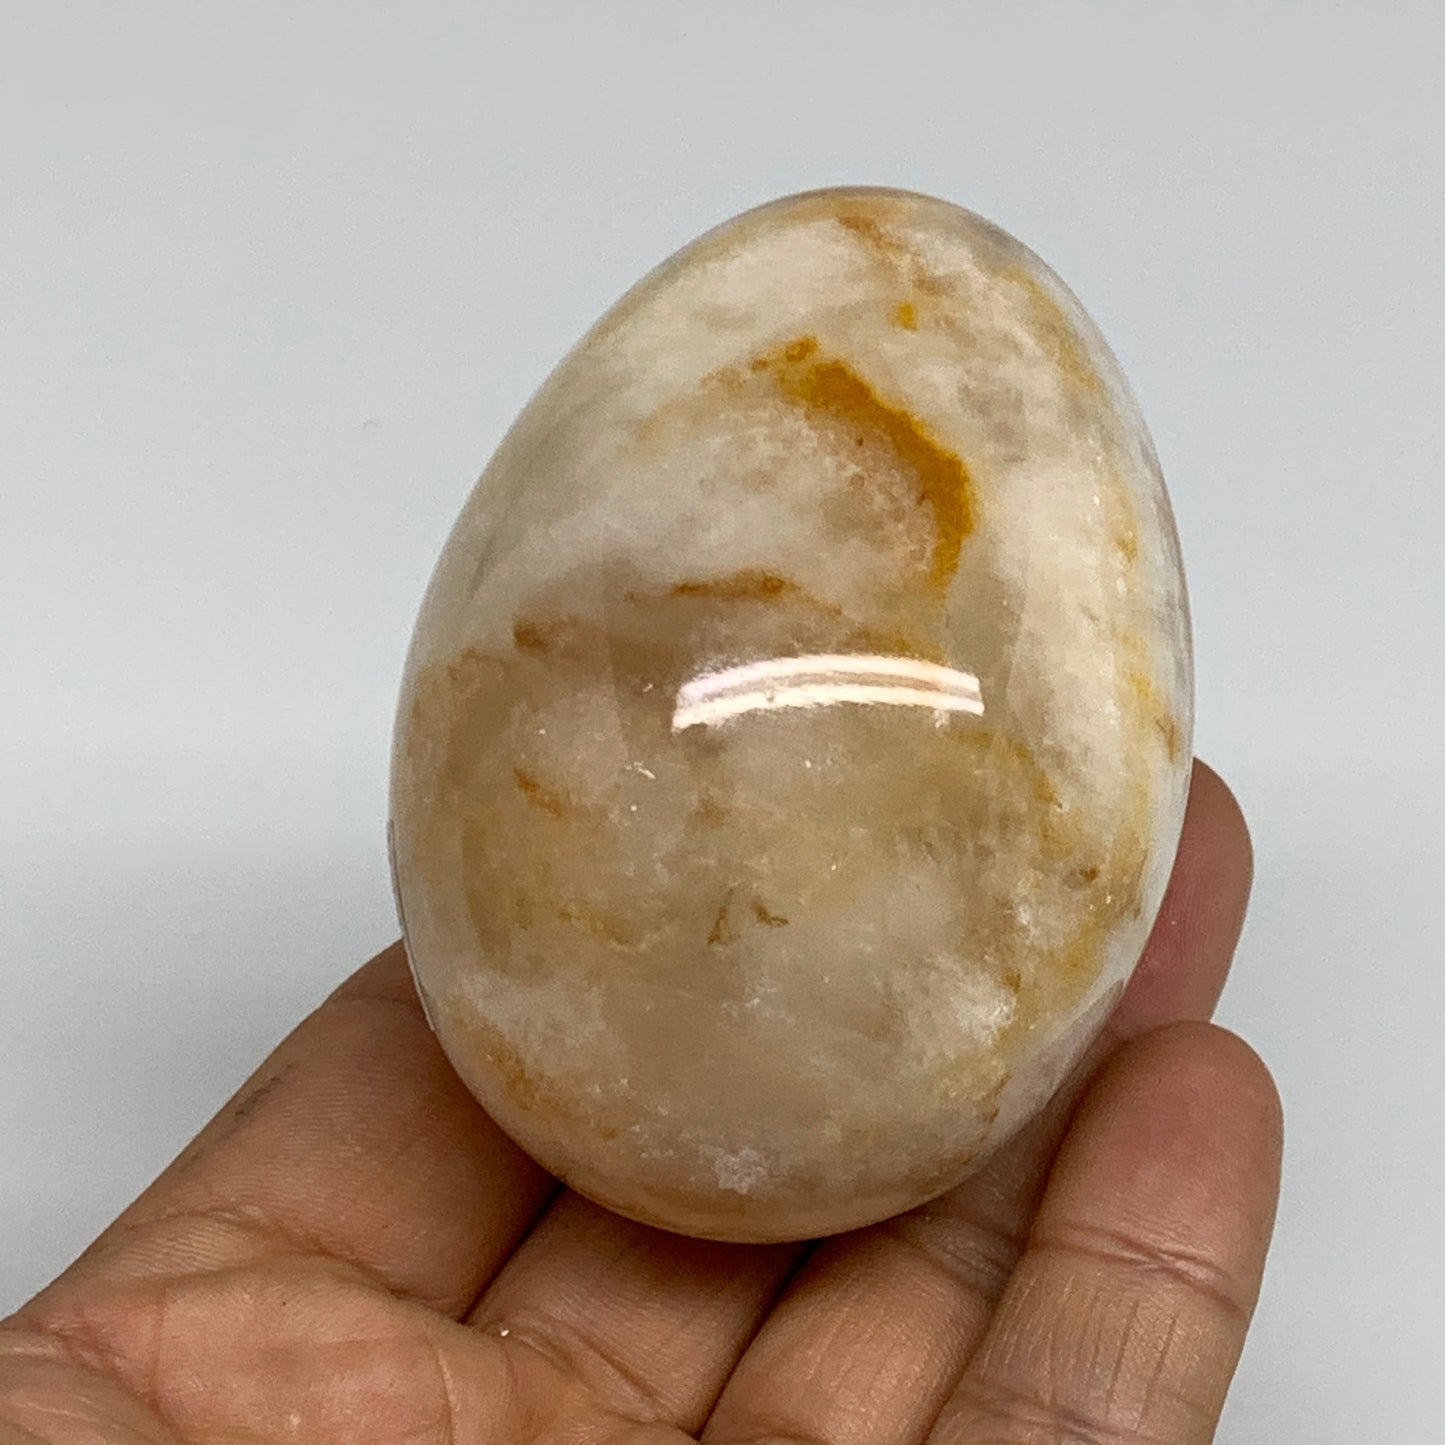 247g, 2.7"x2" Natural Green Onyx Egg Gemstone Mineral, from Pakistan, B32018